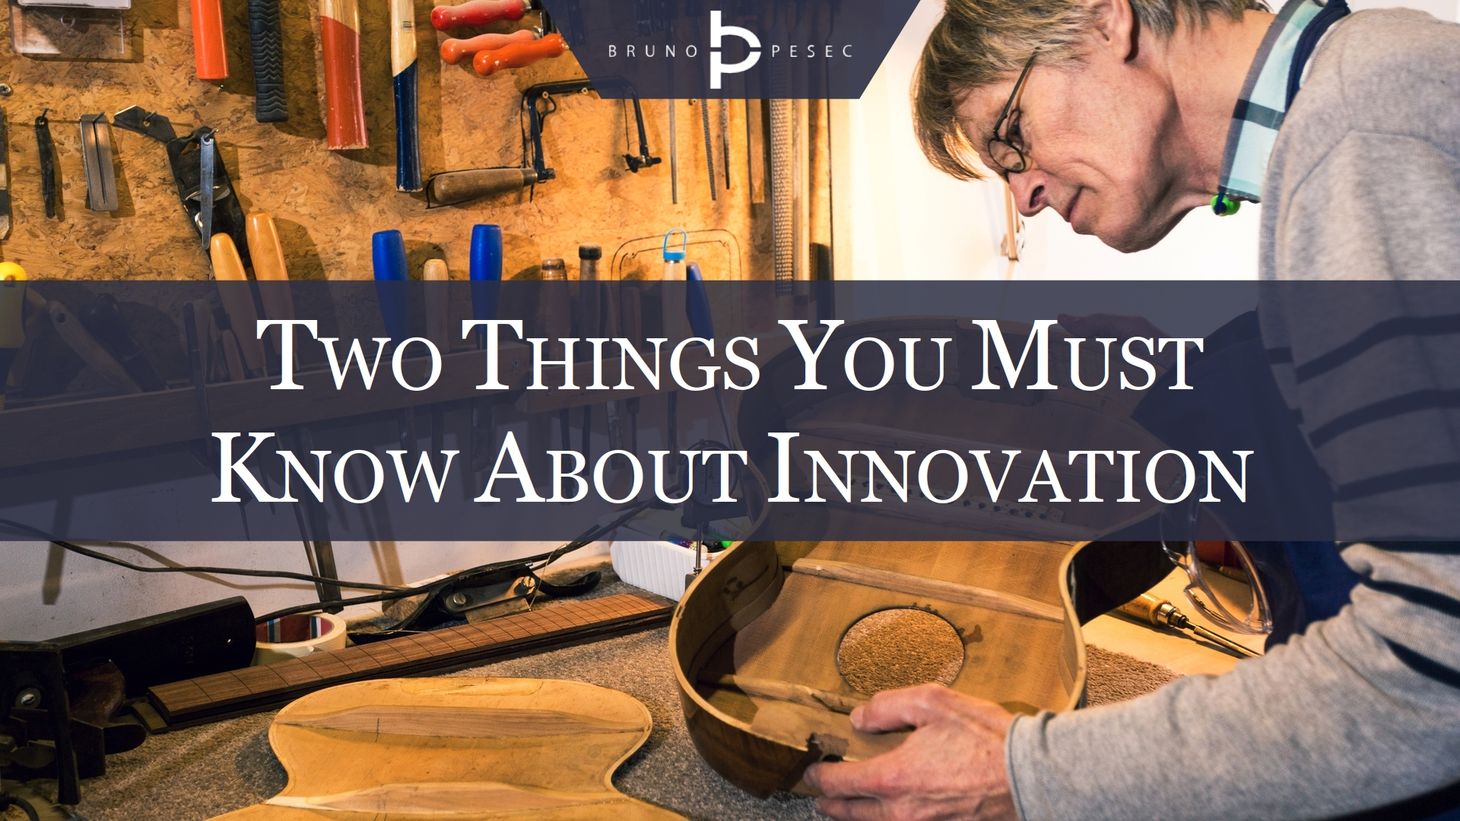 Two things you must know about innovation